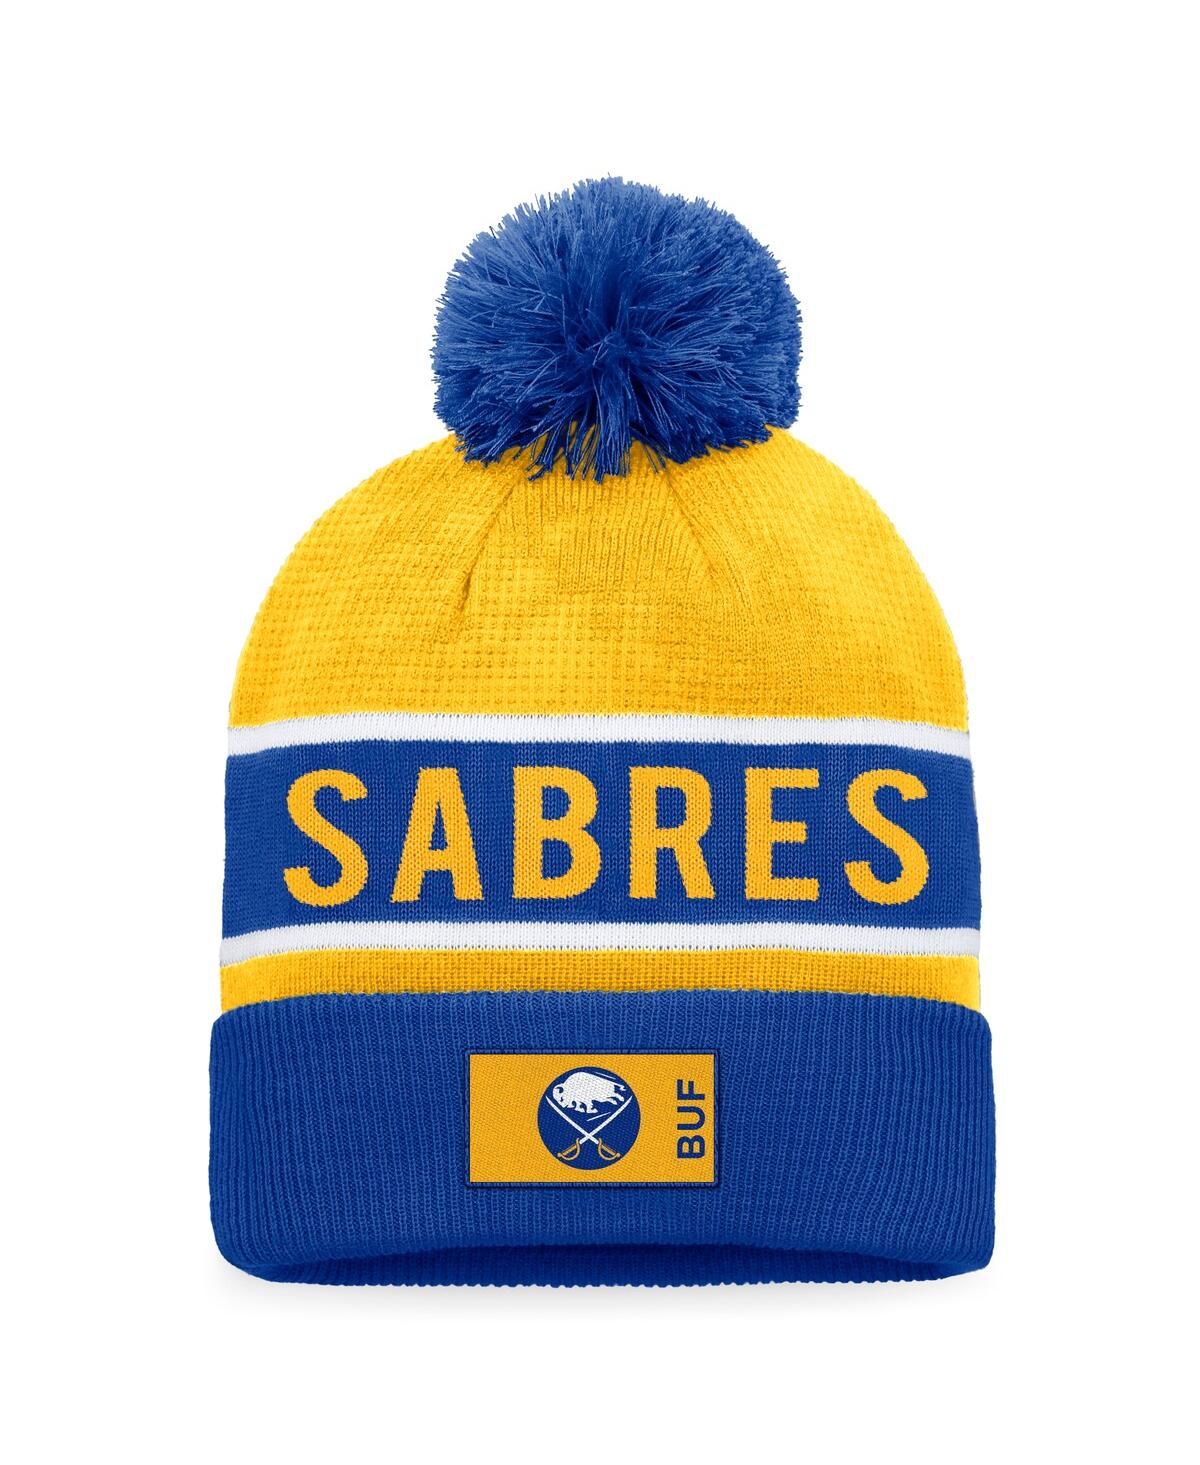 Men's Fanatics Royal, Gold Buffalo Sabres Authentic Pro Rink Cuffed Knit Hat with Pom - Royal, Gold